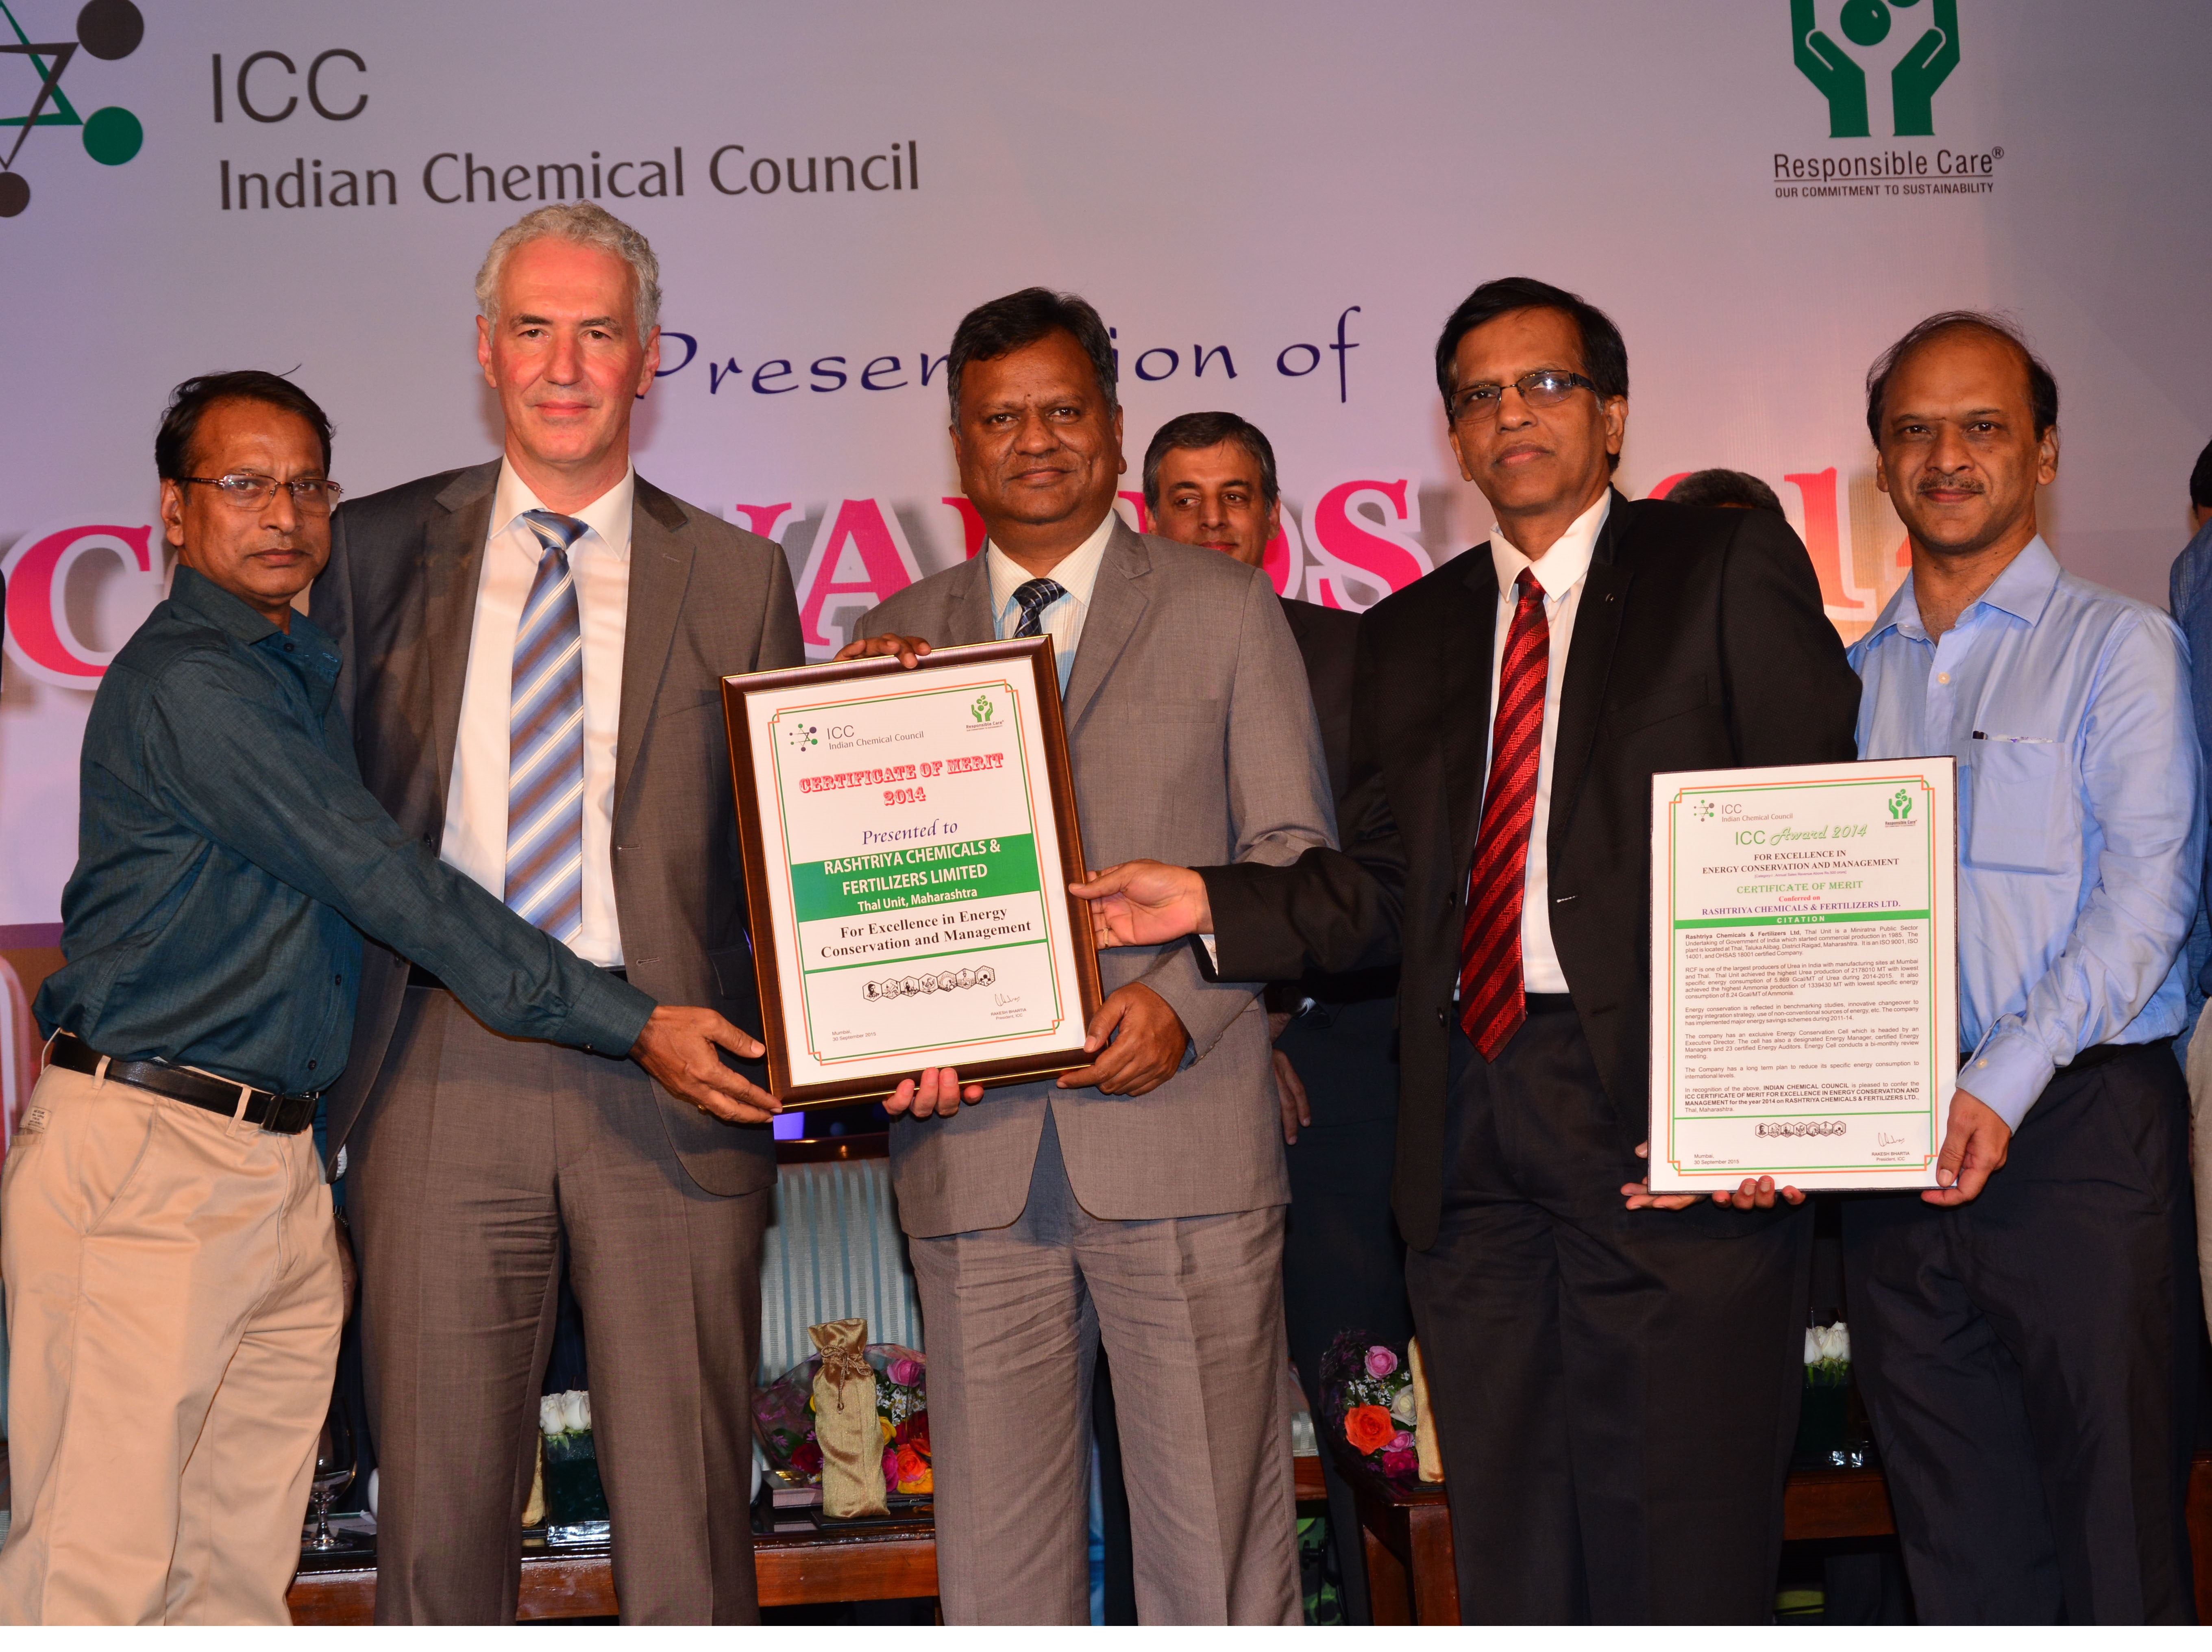 RCF Bags ICC Award for Excellence in Energy Conservation and Management